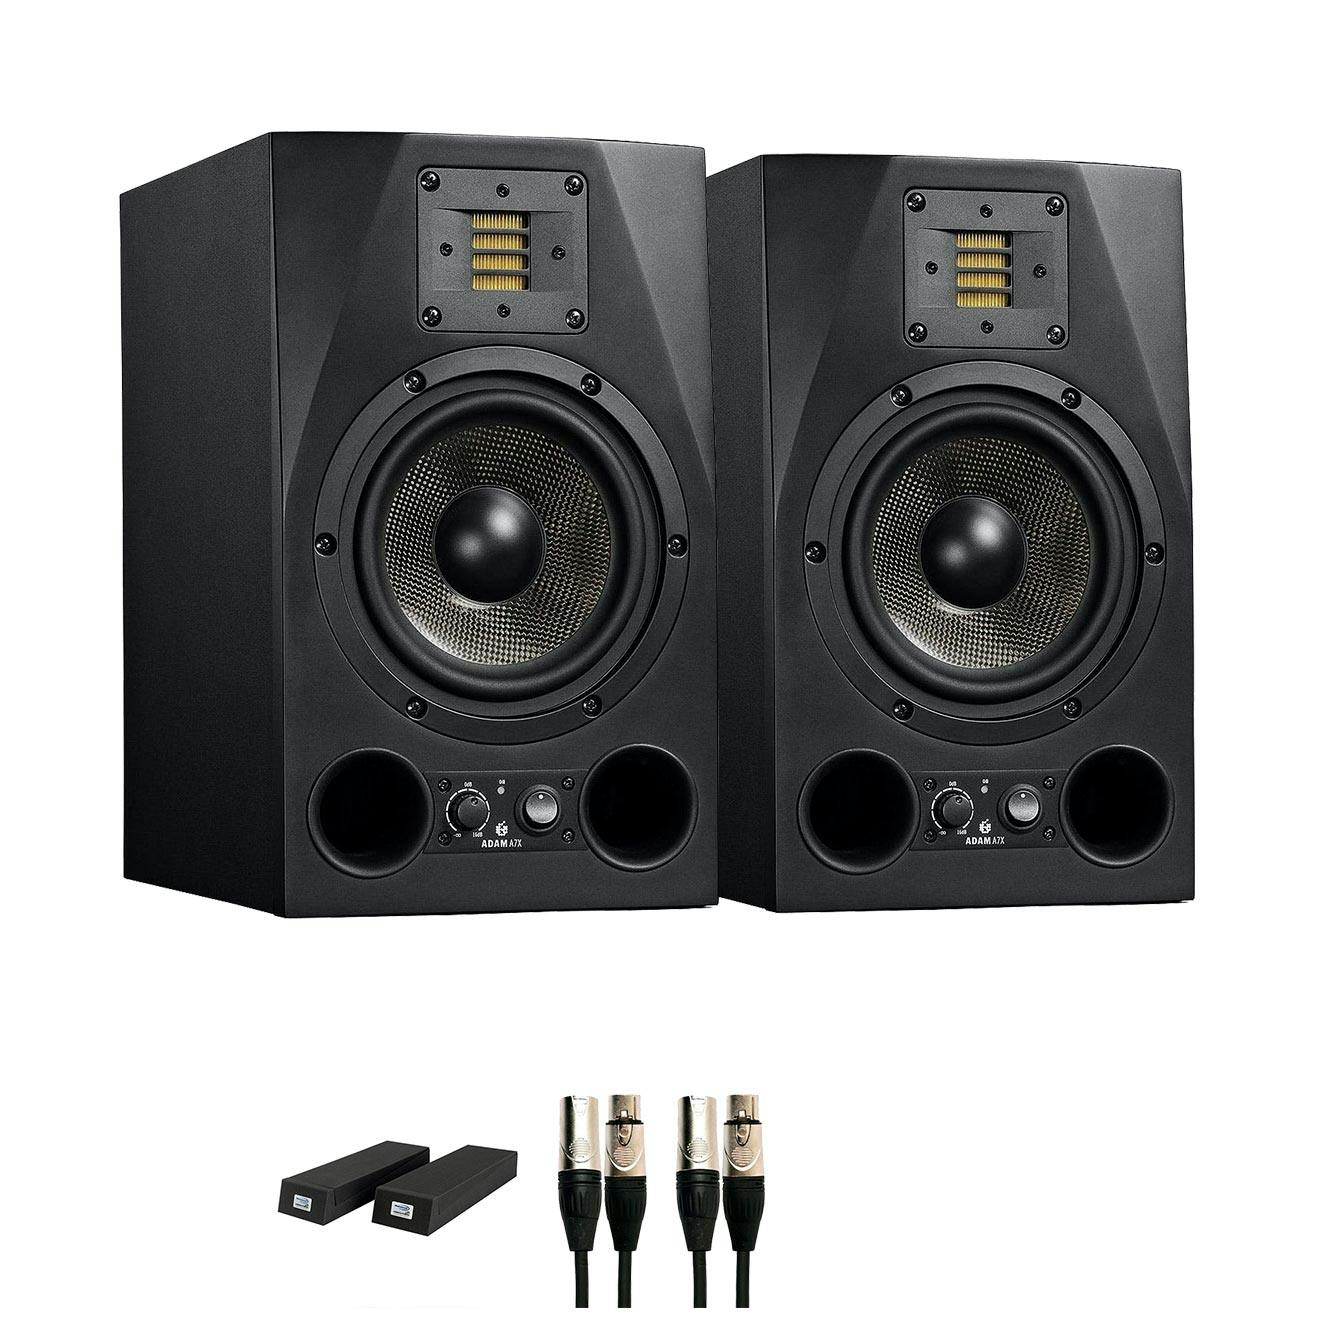 ADAM Audio A7X Monitor Bundle With Vibro-Pad Desktop Speaker Stands and Cables